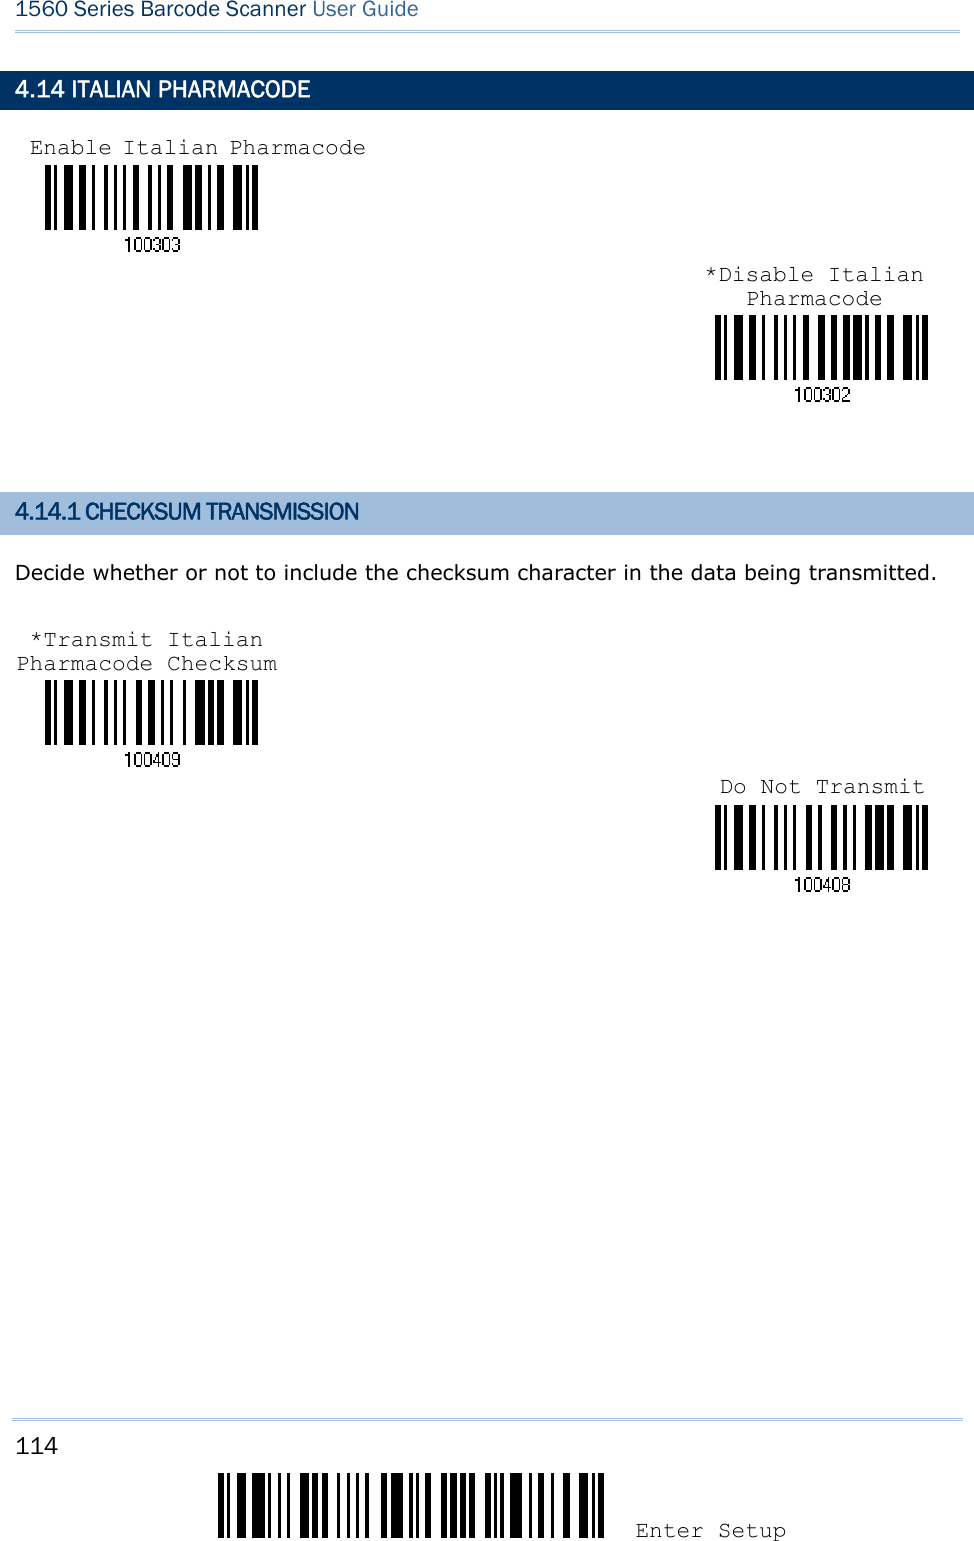 114 Enter Setup 1560 Series Barcode Scanner User Guide  4.14 ITALIAN PHARMACODE    4.14.1 CHECKSUM TRANSMISSION Decide whether or not to include the checksum character in the data being transmitted.         Enable Italian Pharmacode *Disable Italian Pharmacode *Transmit Italian Pharmacode Checksum Do Not Transmit